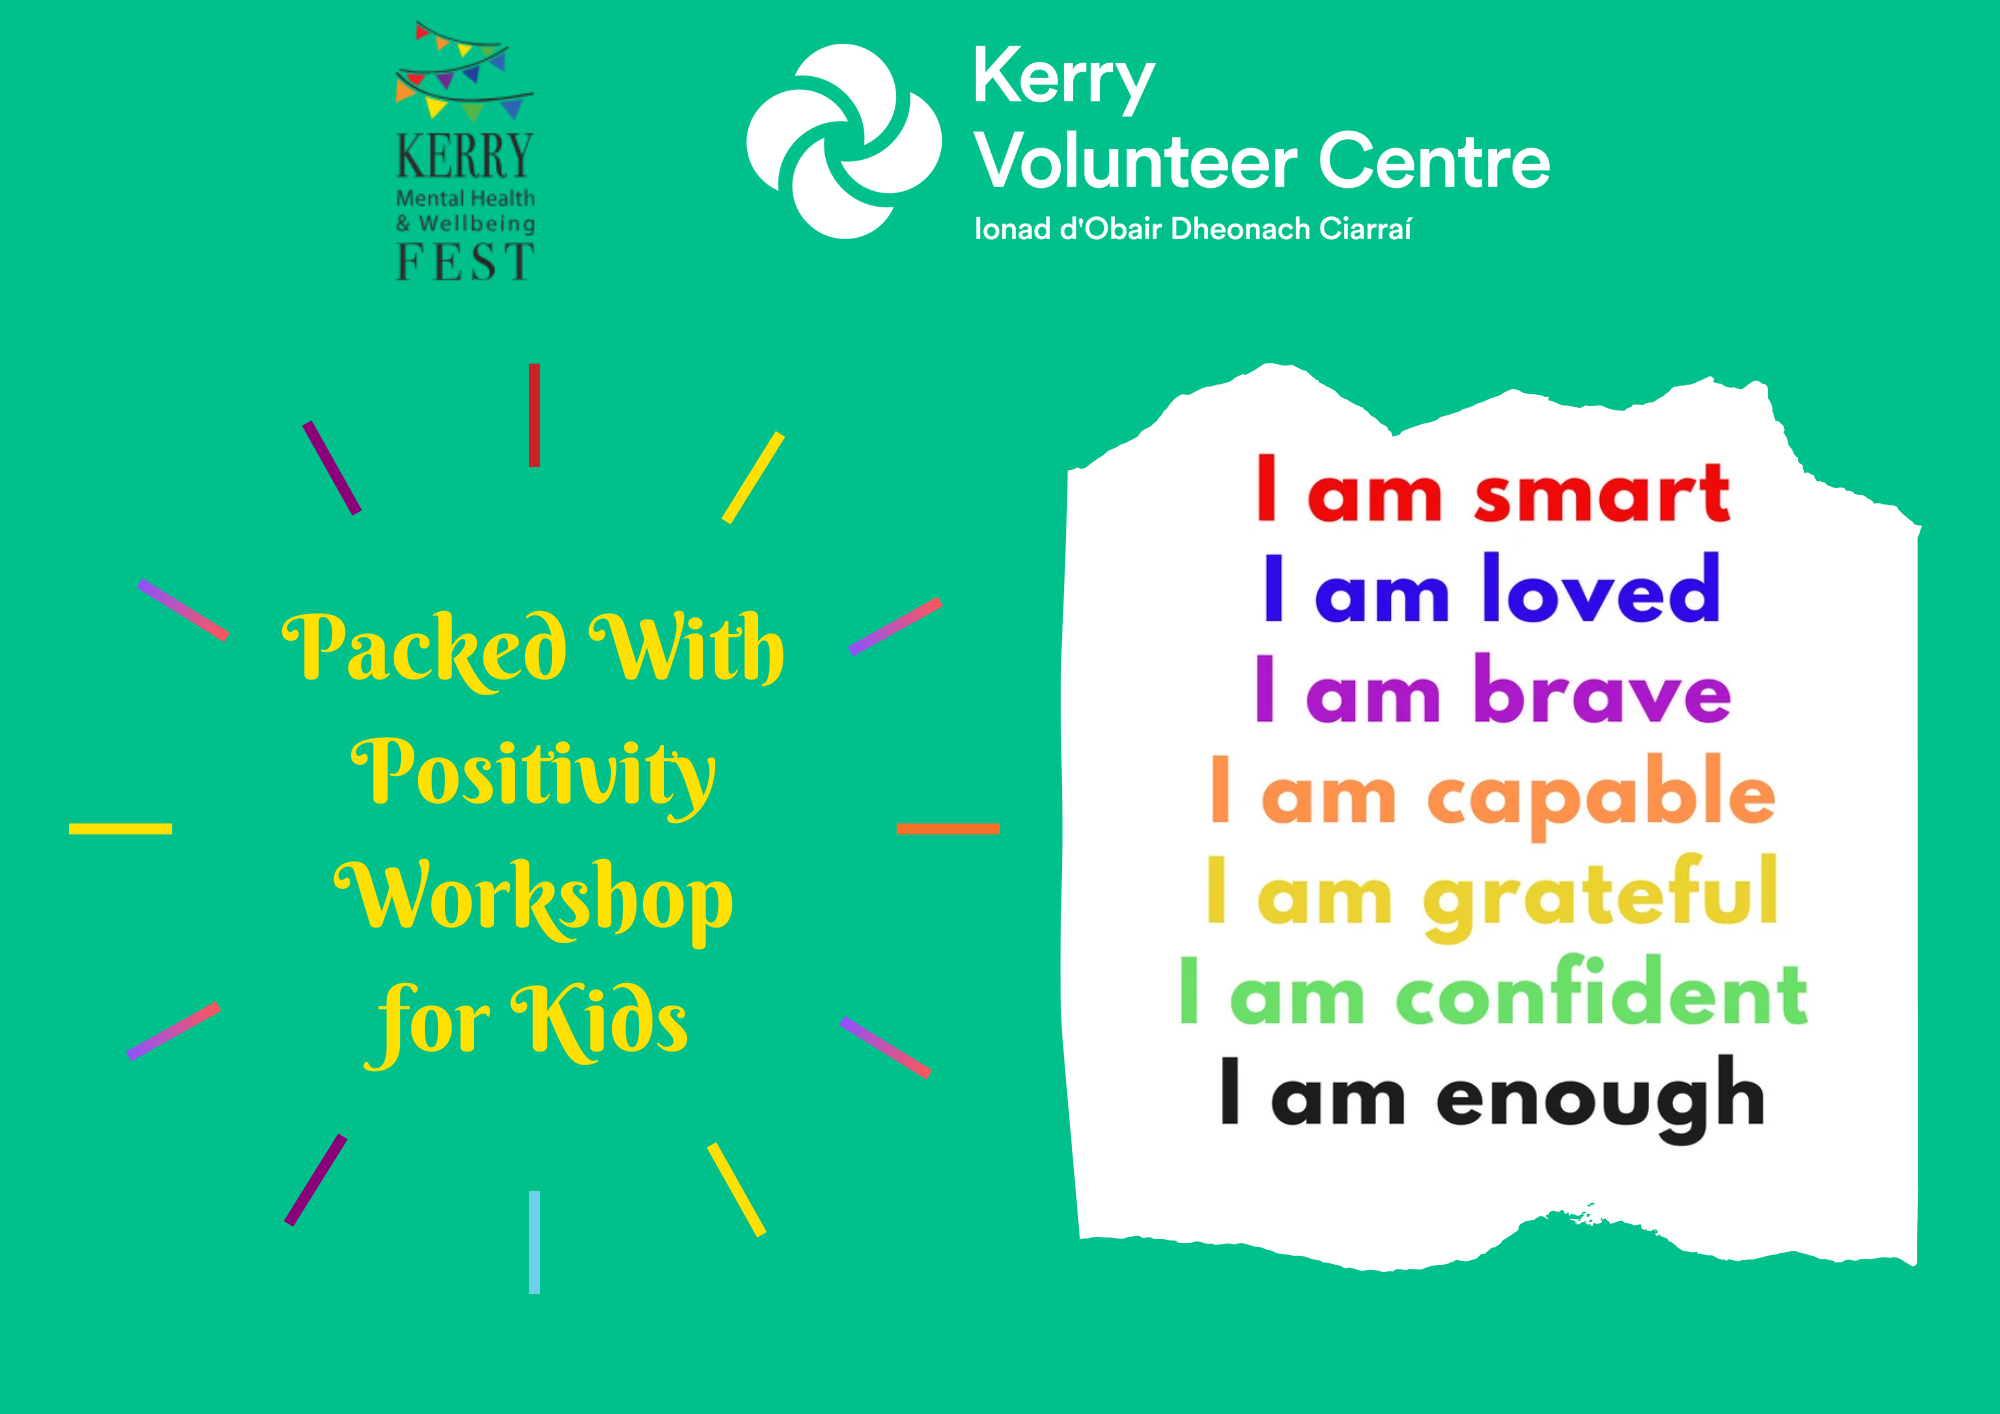 Packed With Positivity -8 to 12 year olds:10am to 12noon event at Kerry Mental Health & Wellbeing Fest 2022